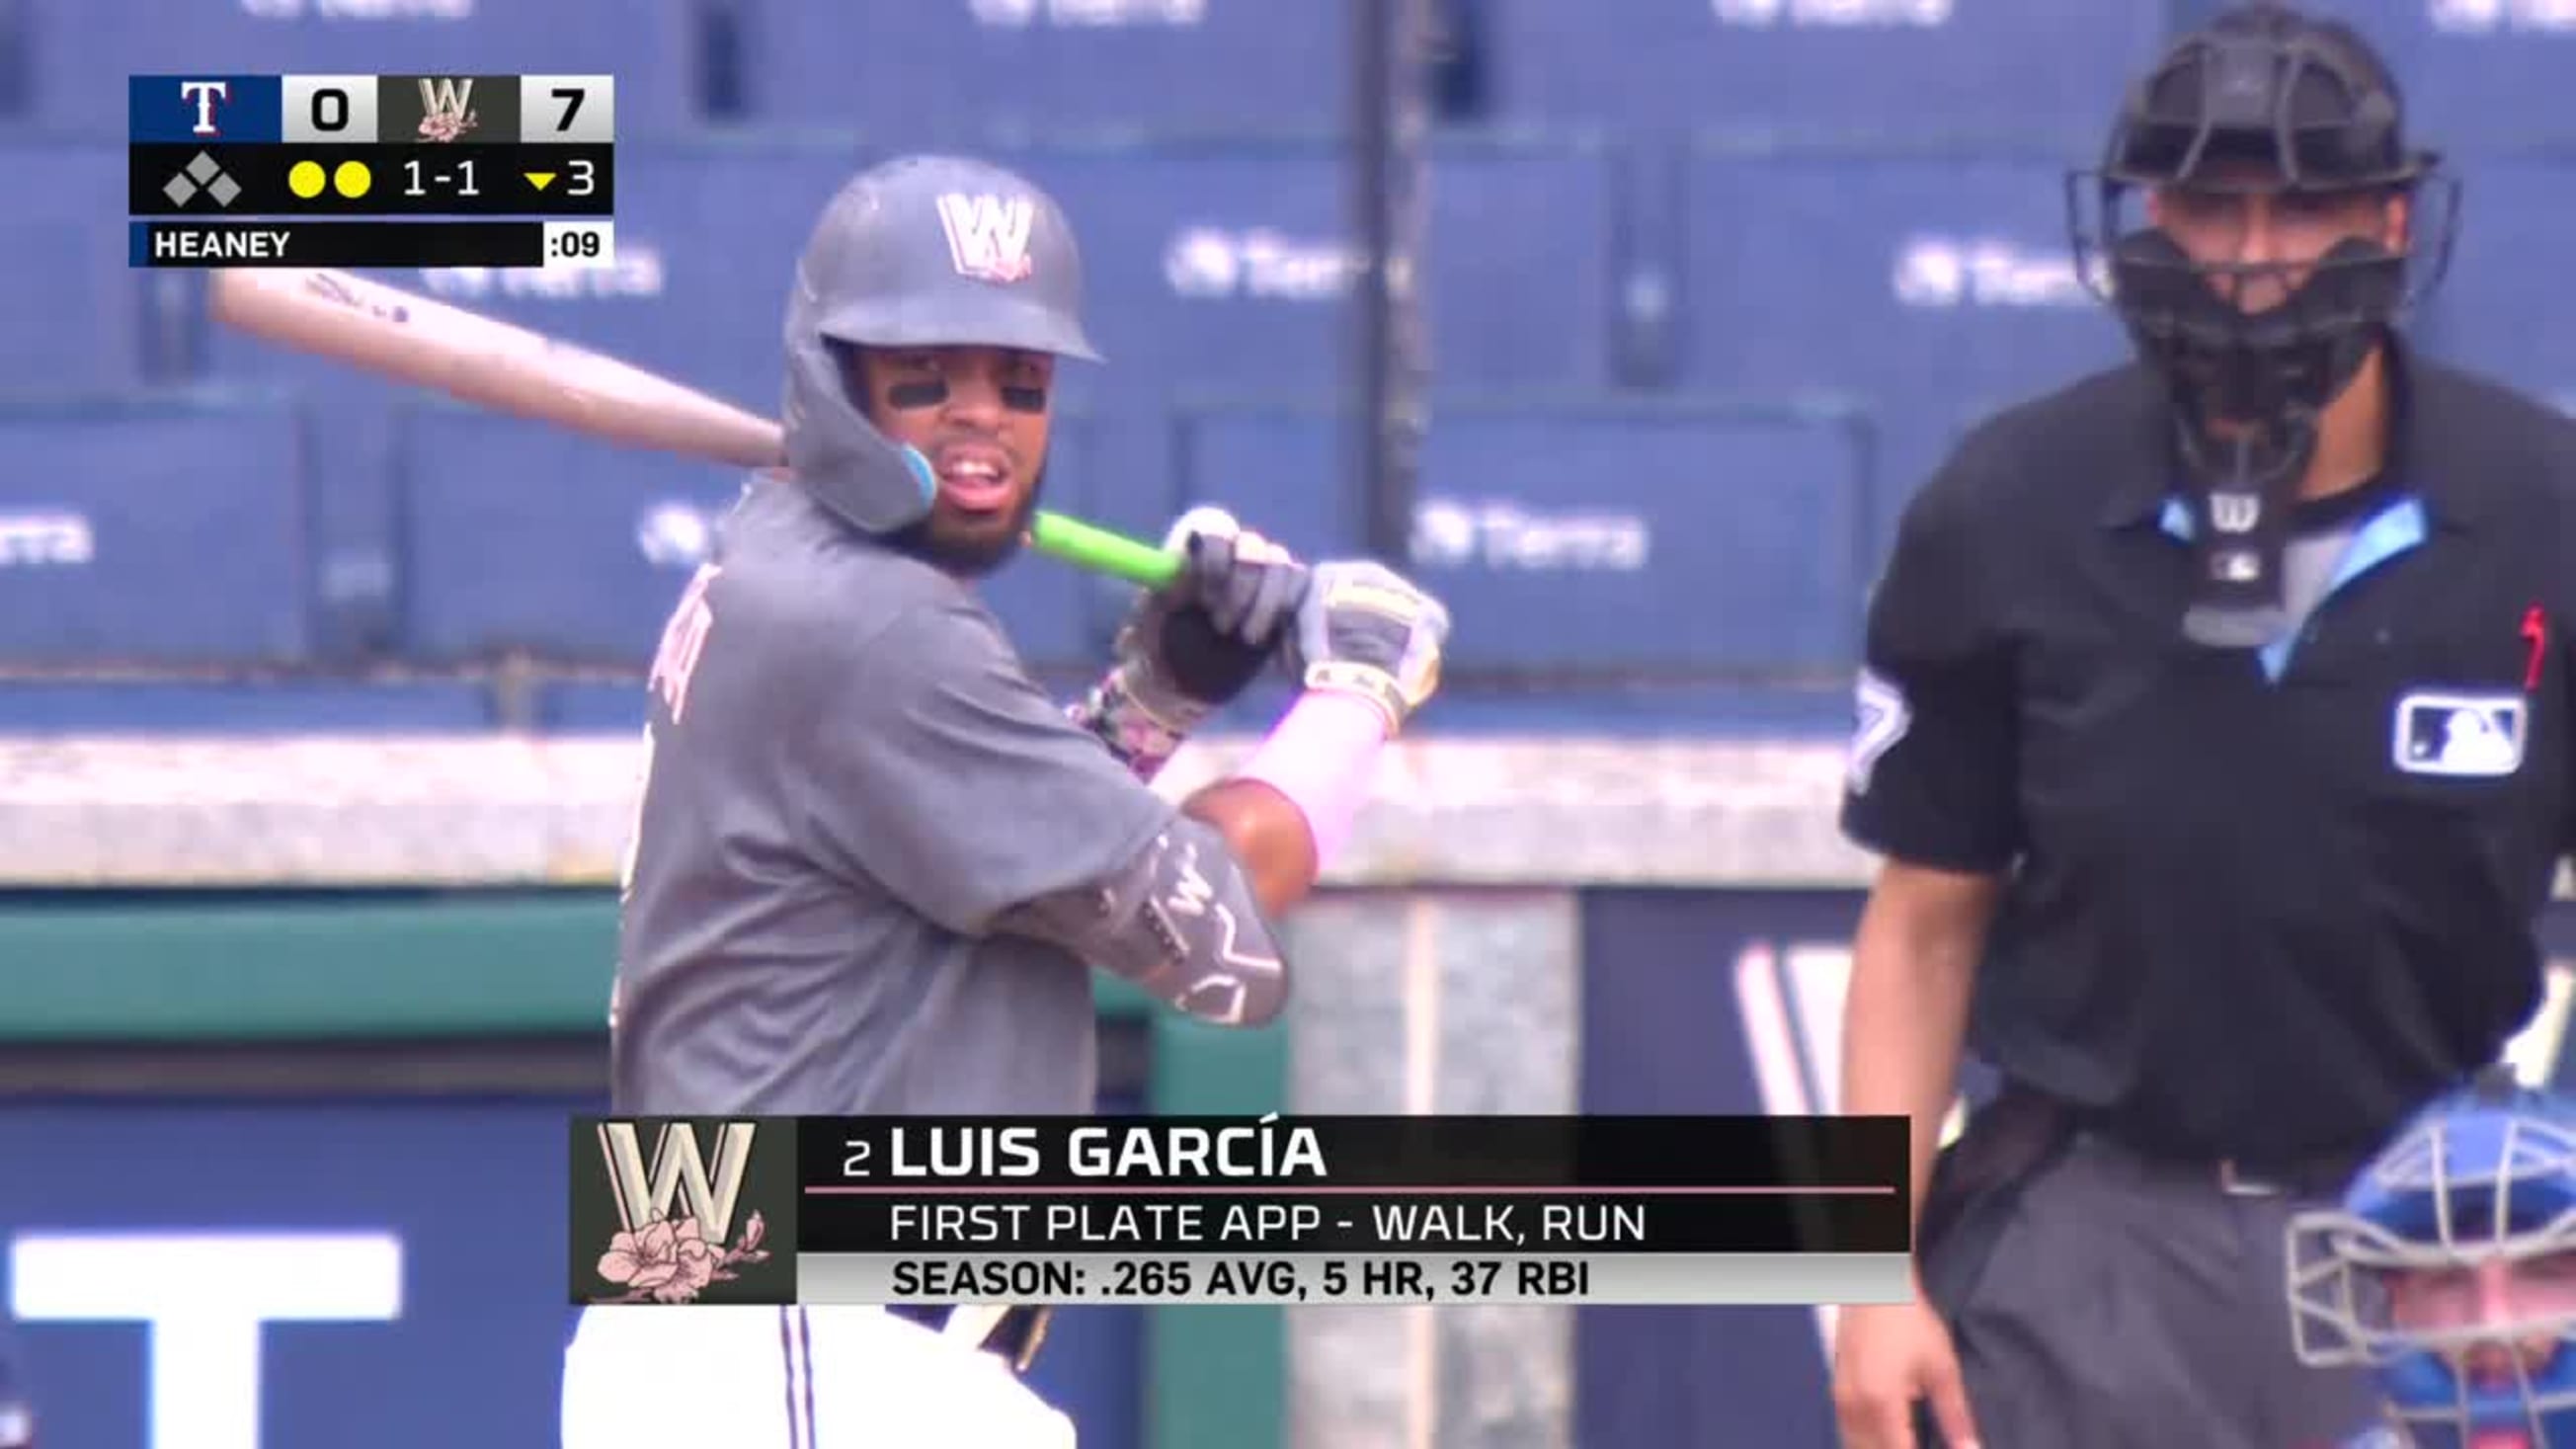 Codify on X: Luis Garcia tonight: 7 strikeouts in 3 innings and